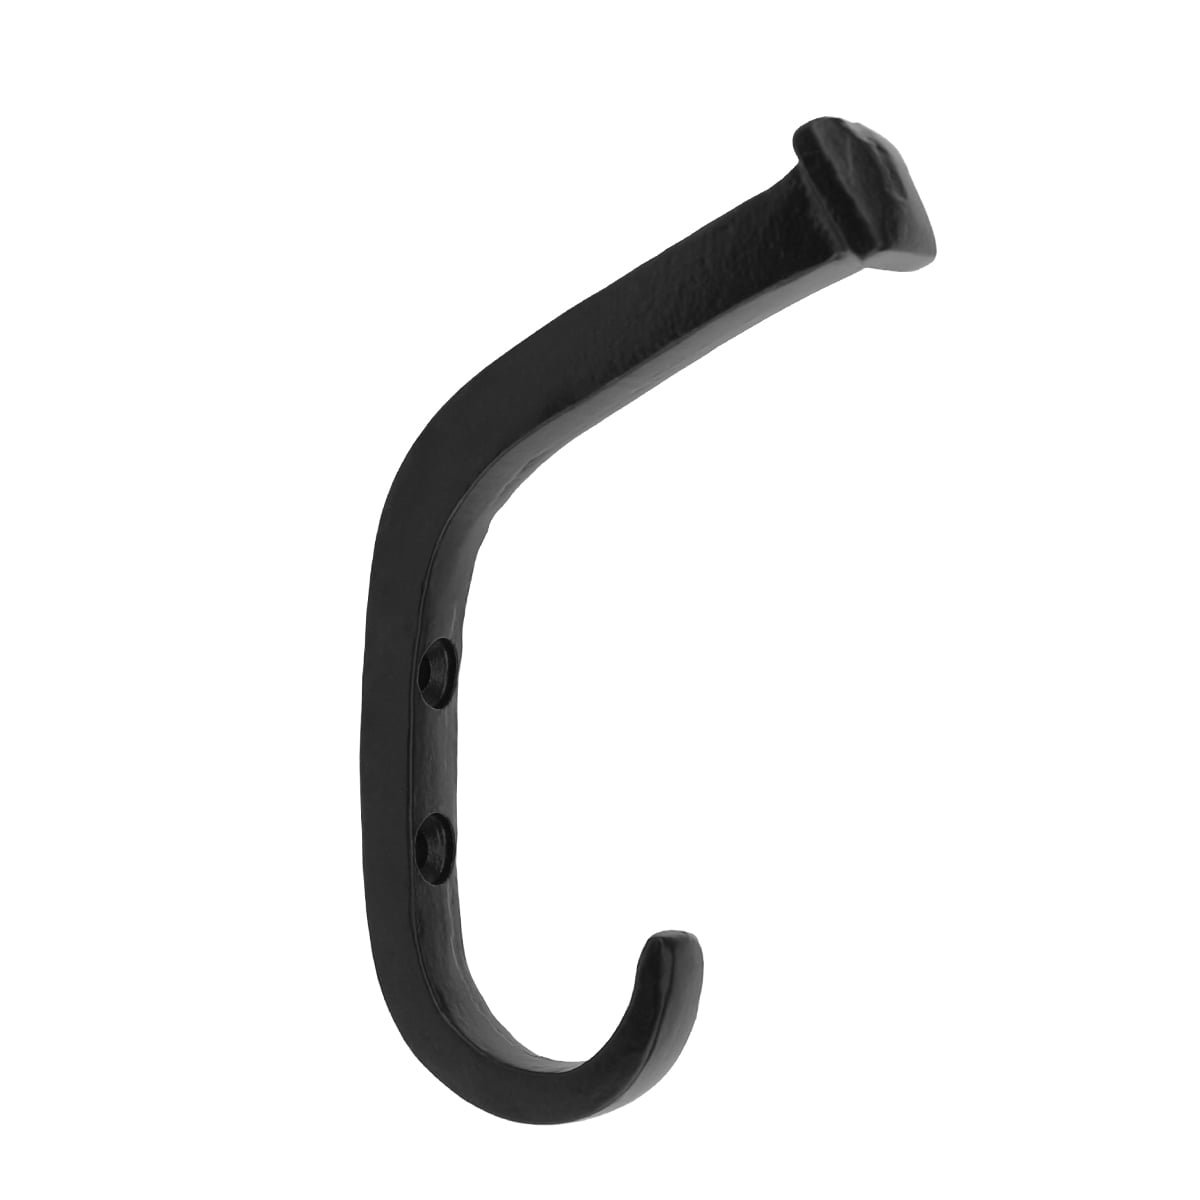 Wall hook black cast iron Barby - 110 mm